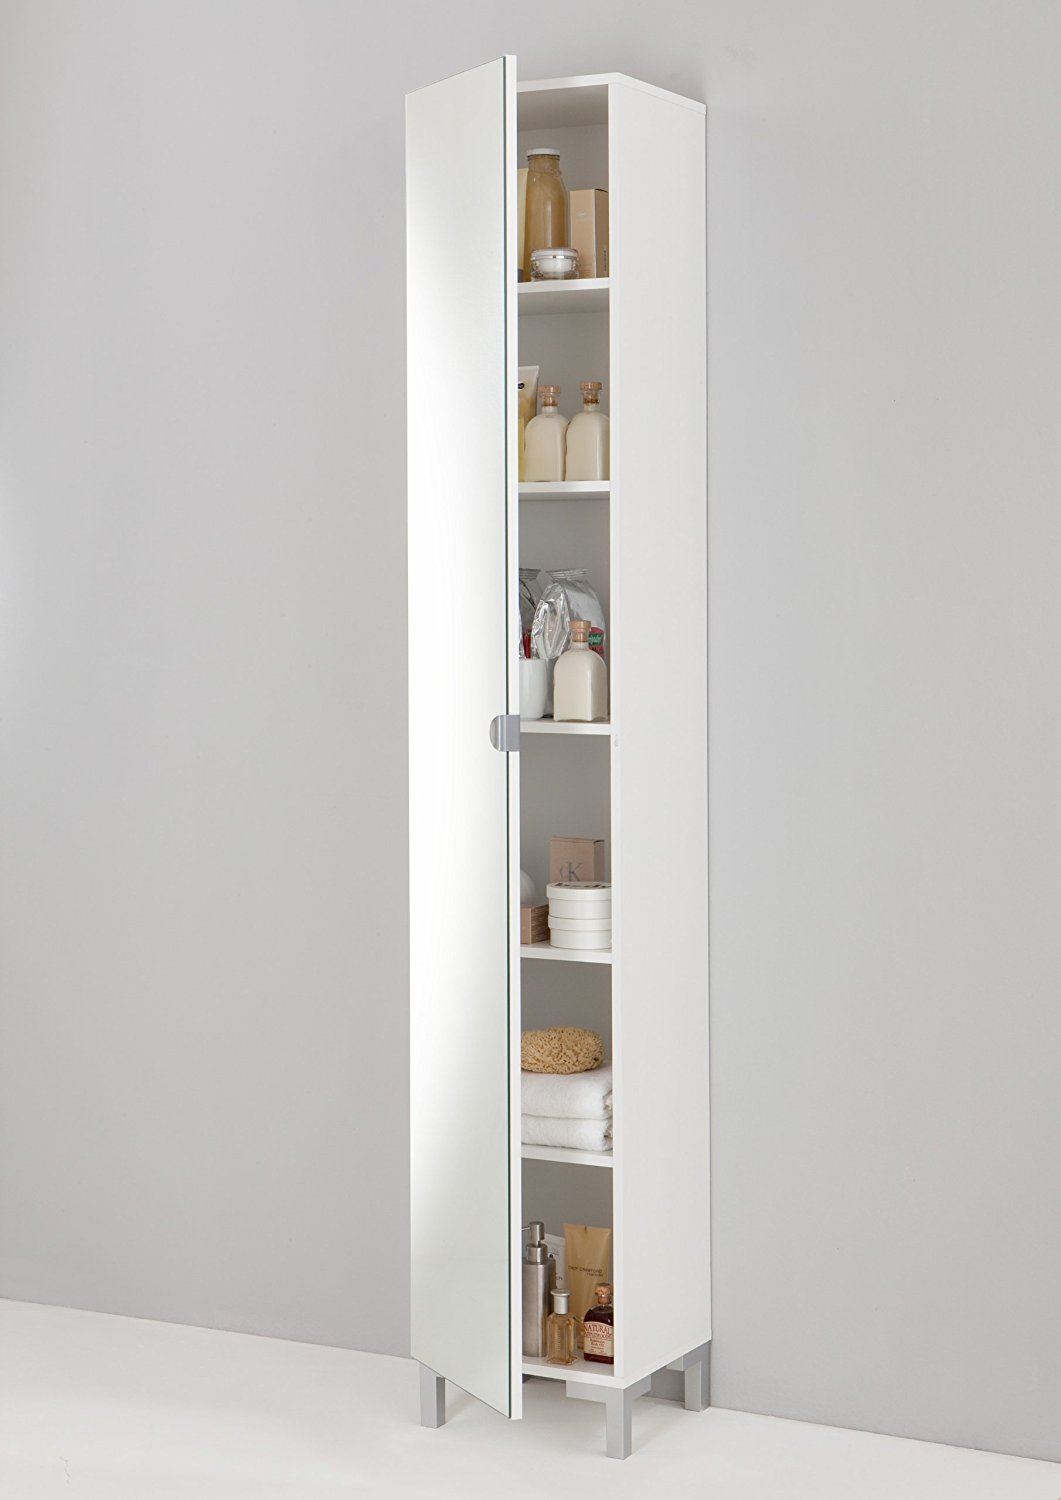 Tall Narrow Mirrored Bathroom Cabinet Mirrors Peaceful Design With inside sizing 1061 X 1500